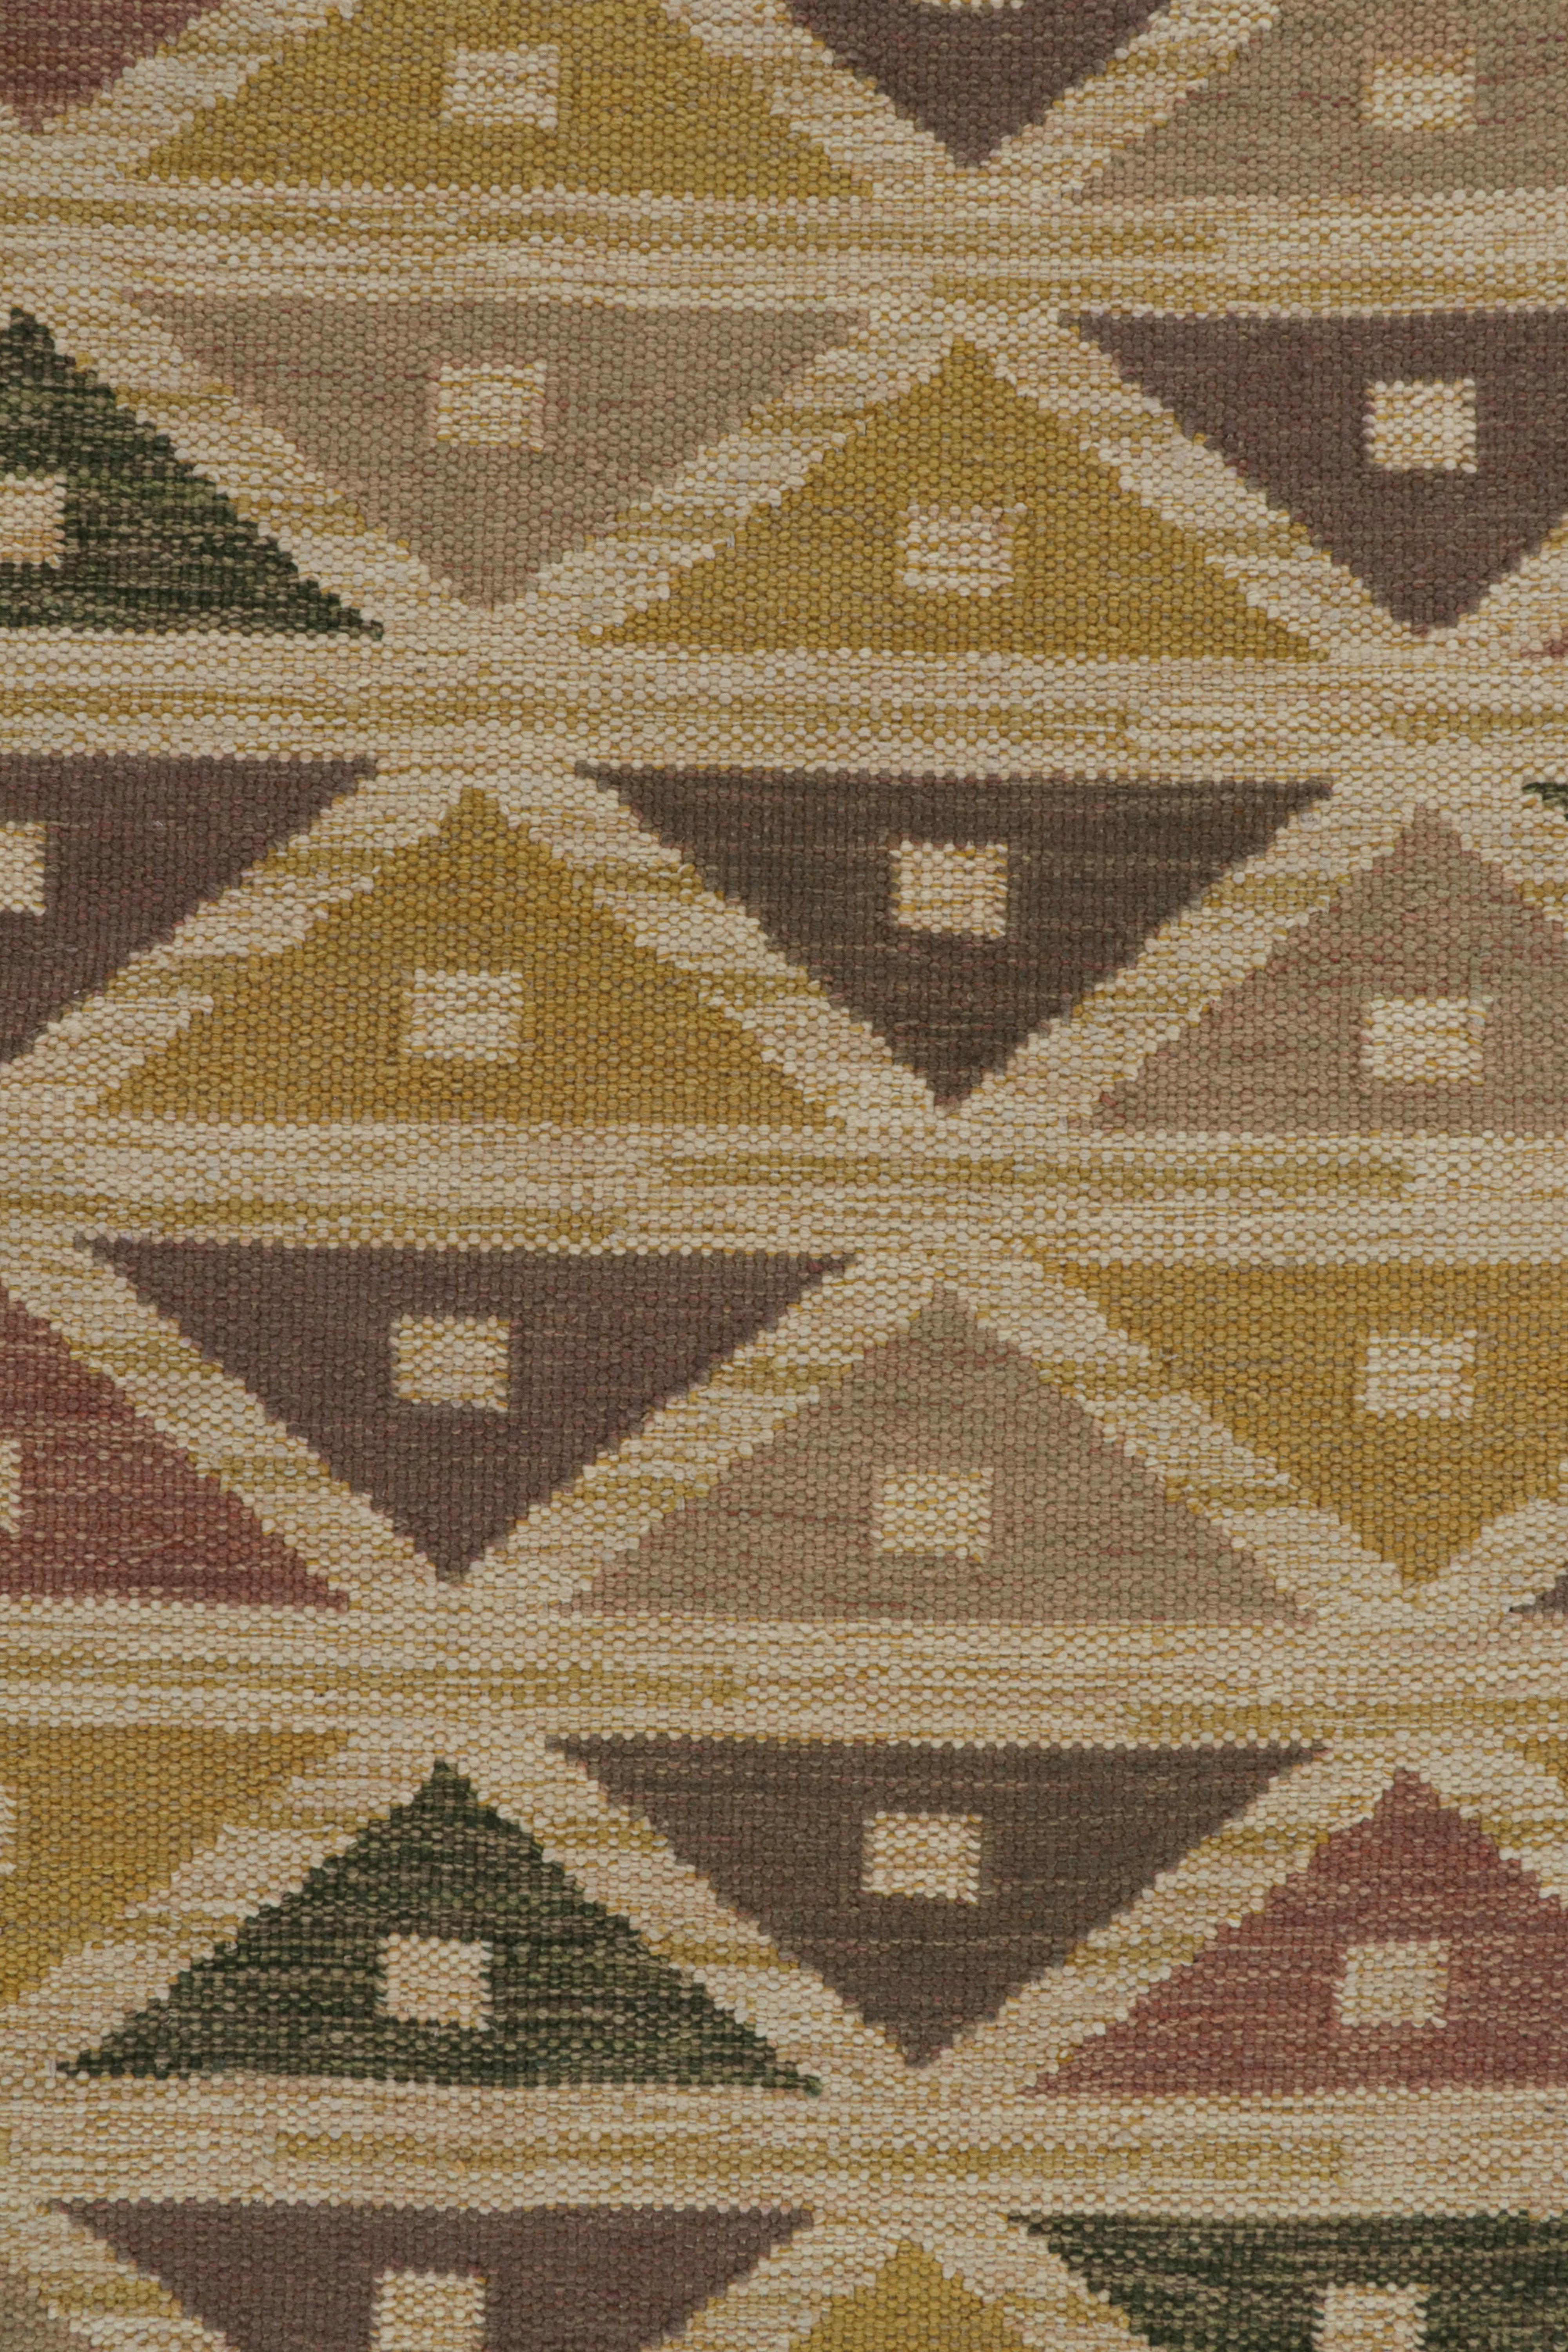 Rug & Kilim’s Scandinavian style Kilim rug in Gold & Brown Geometric Patterns In New Condition For Sale In Long Island City, NY